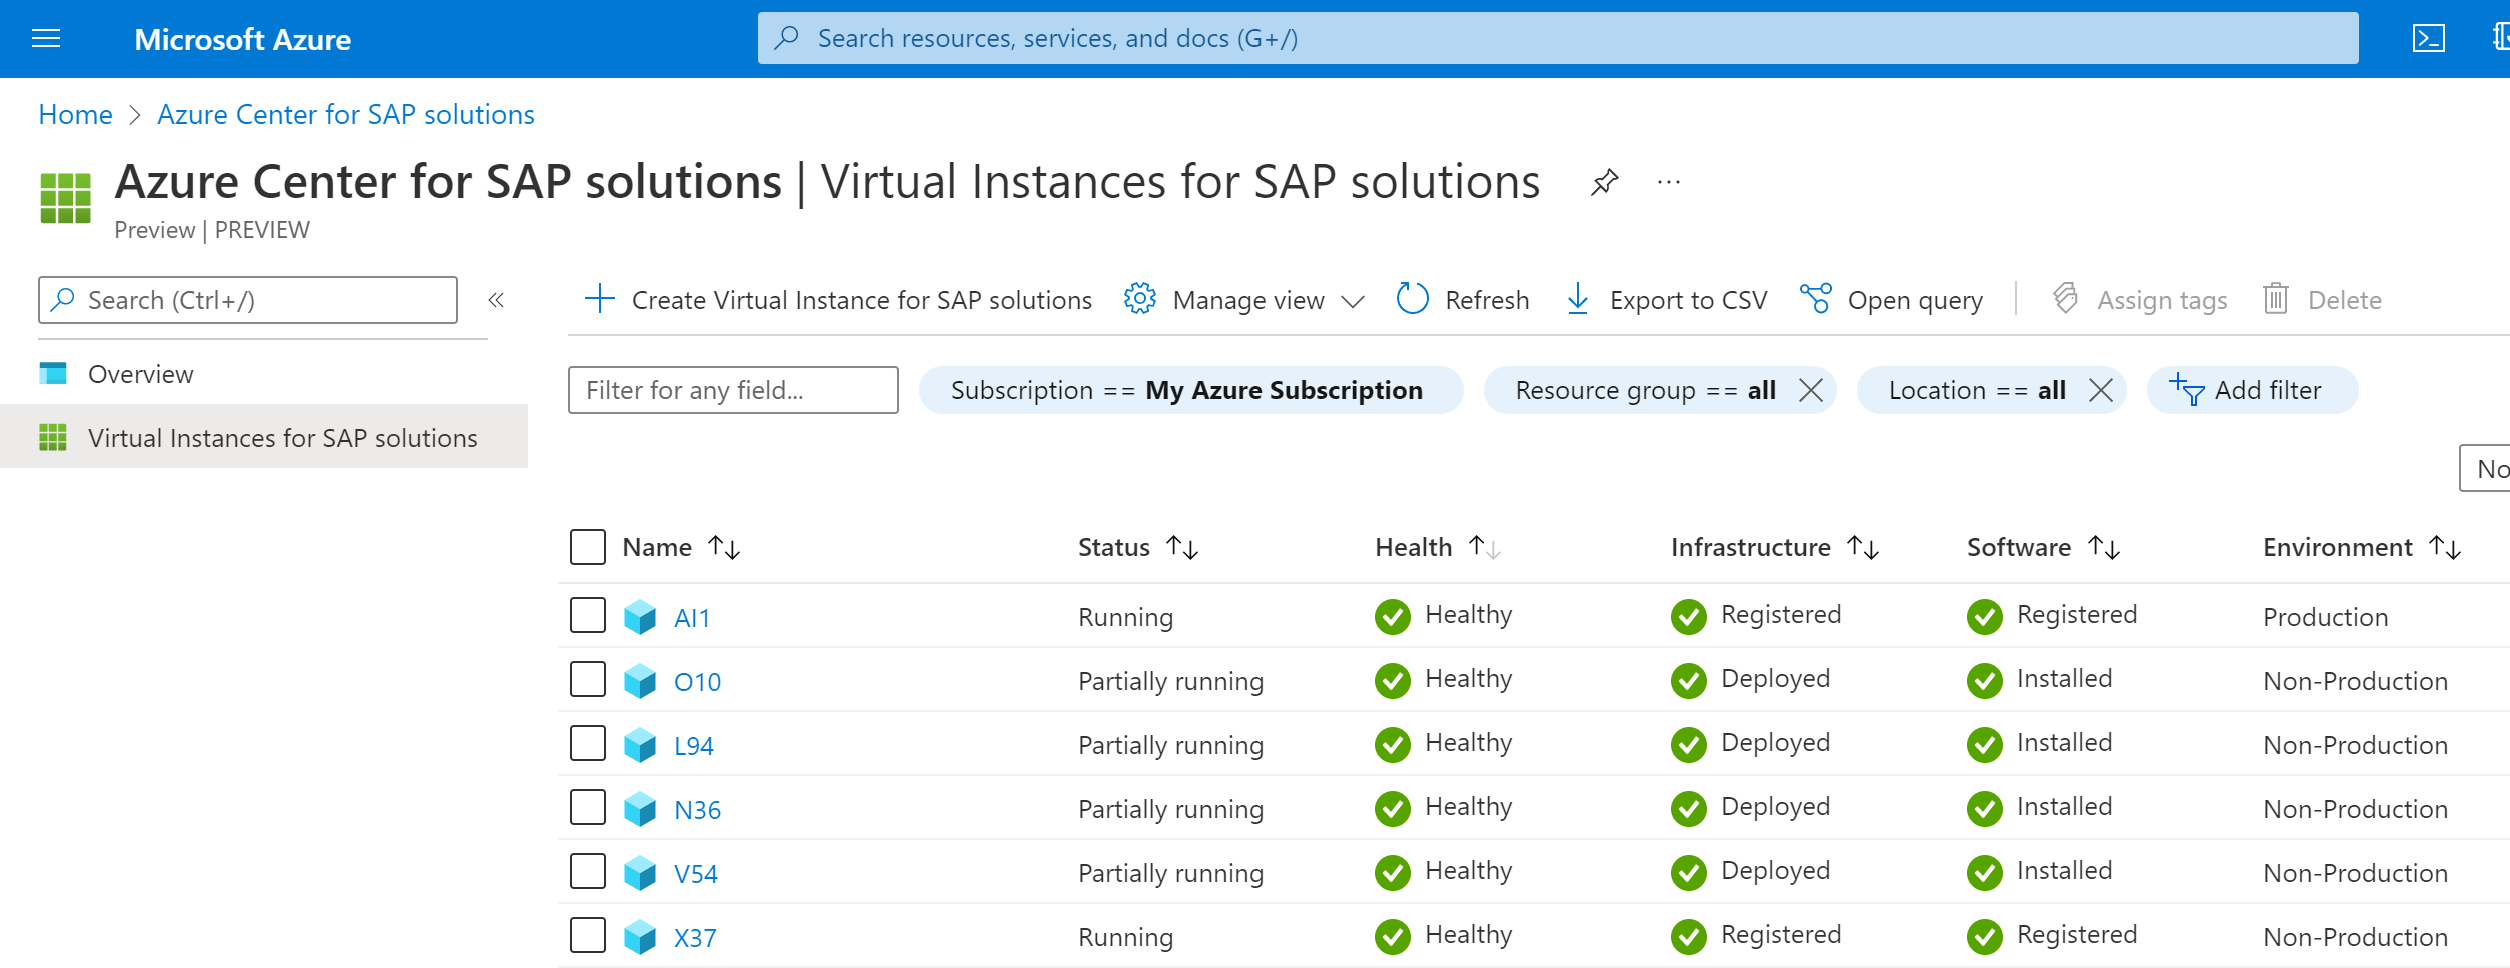 Screenshot of Azure portal, showing the VIS page in the Azure Center for SAP solutions service with a table of available VIS resources.